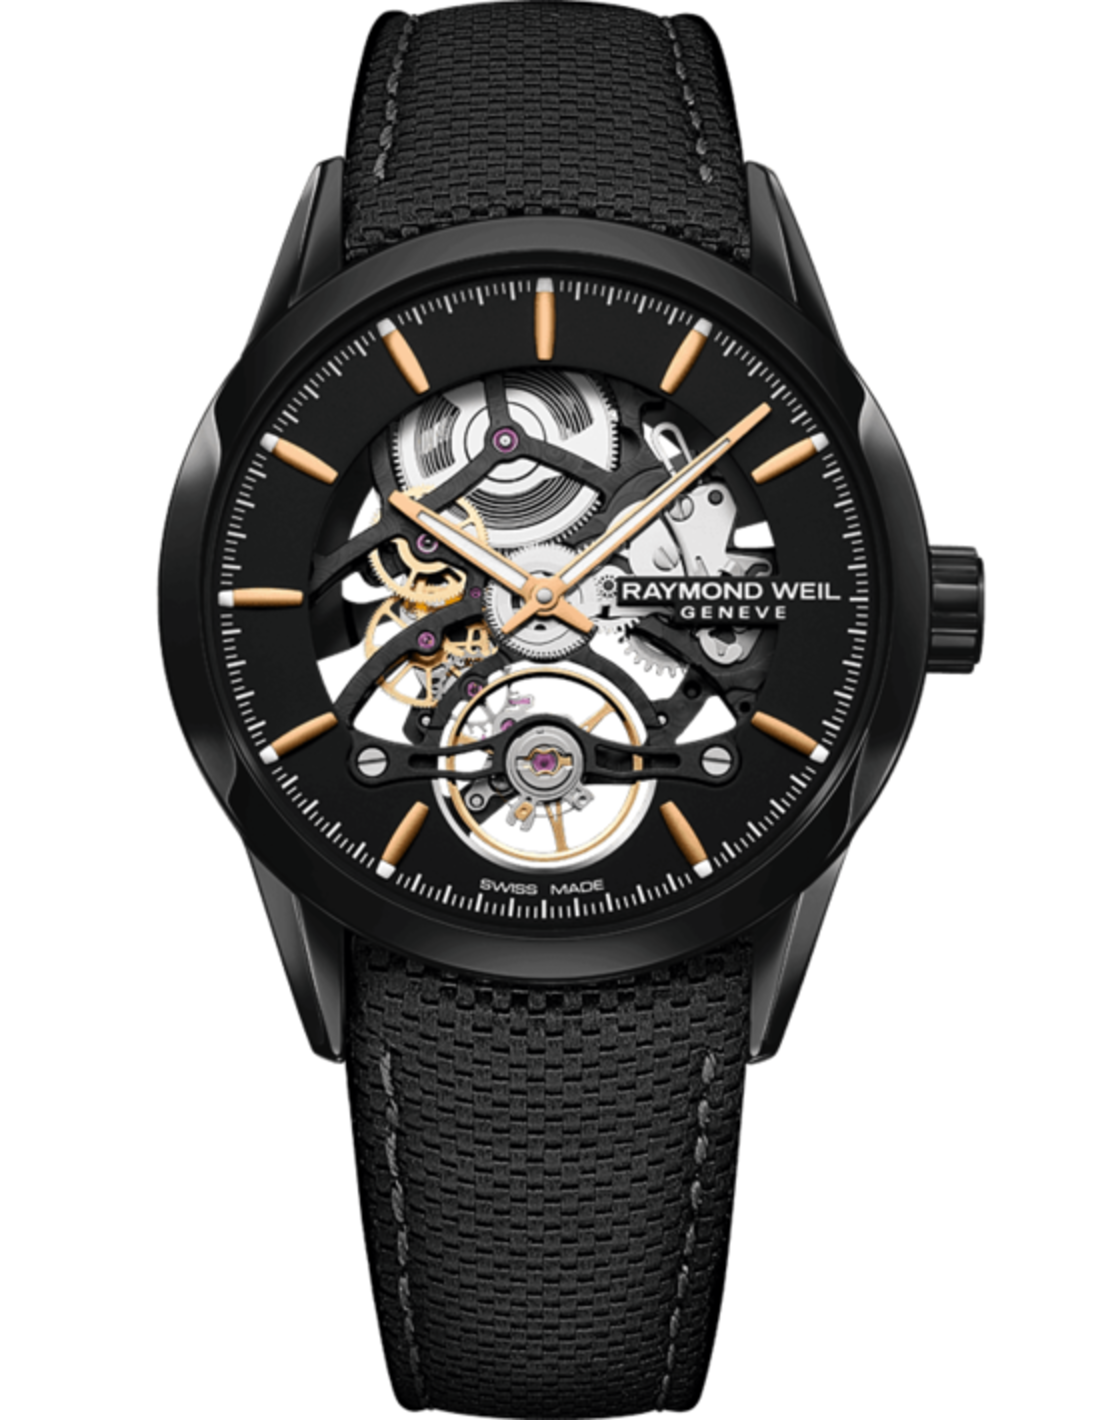 Freelancer Calibre RW1212 Skeleton Men's Automatic Black Watch, 42mm stainless steel, black open-worked dial, black leather strap, Calibre RW1212 in-house movement  2785-BC5-20001